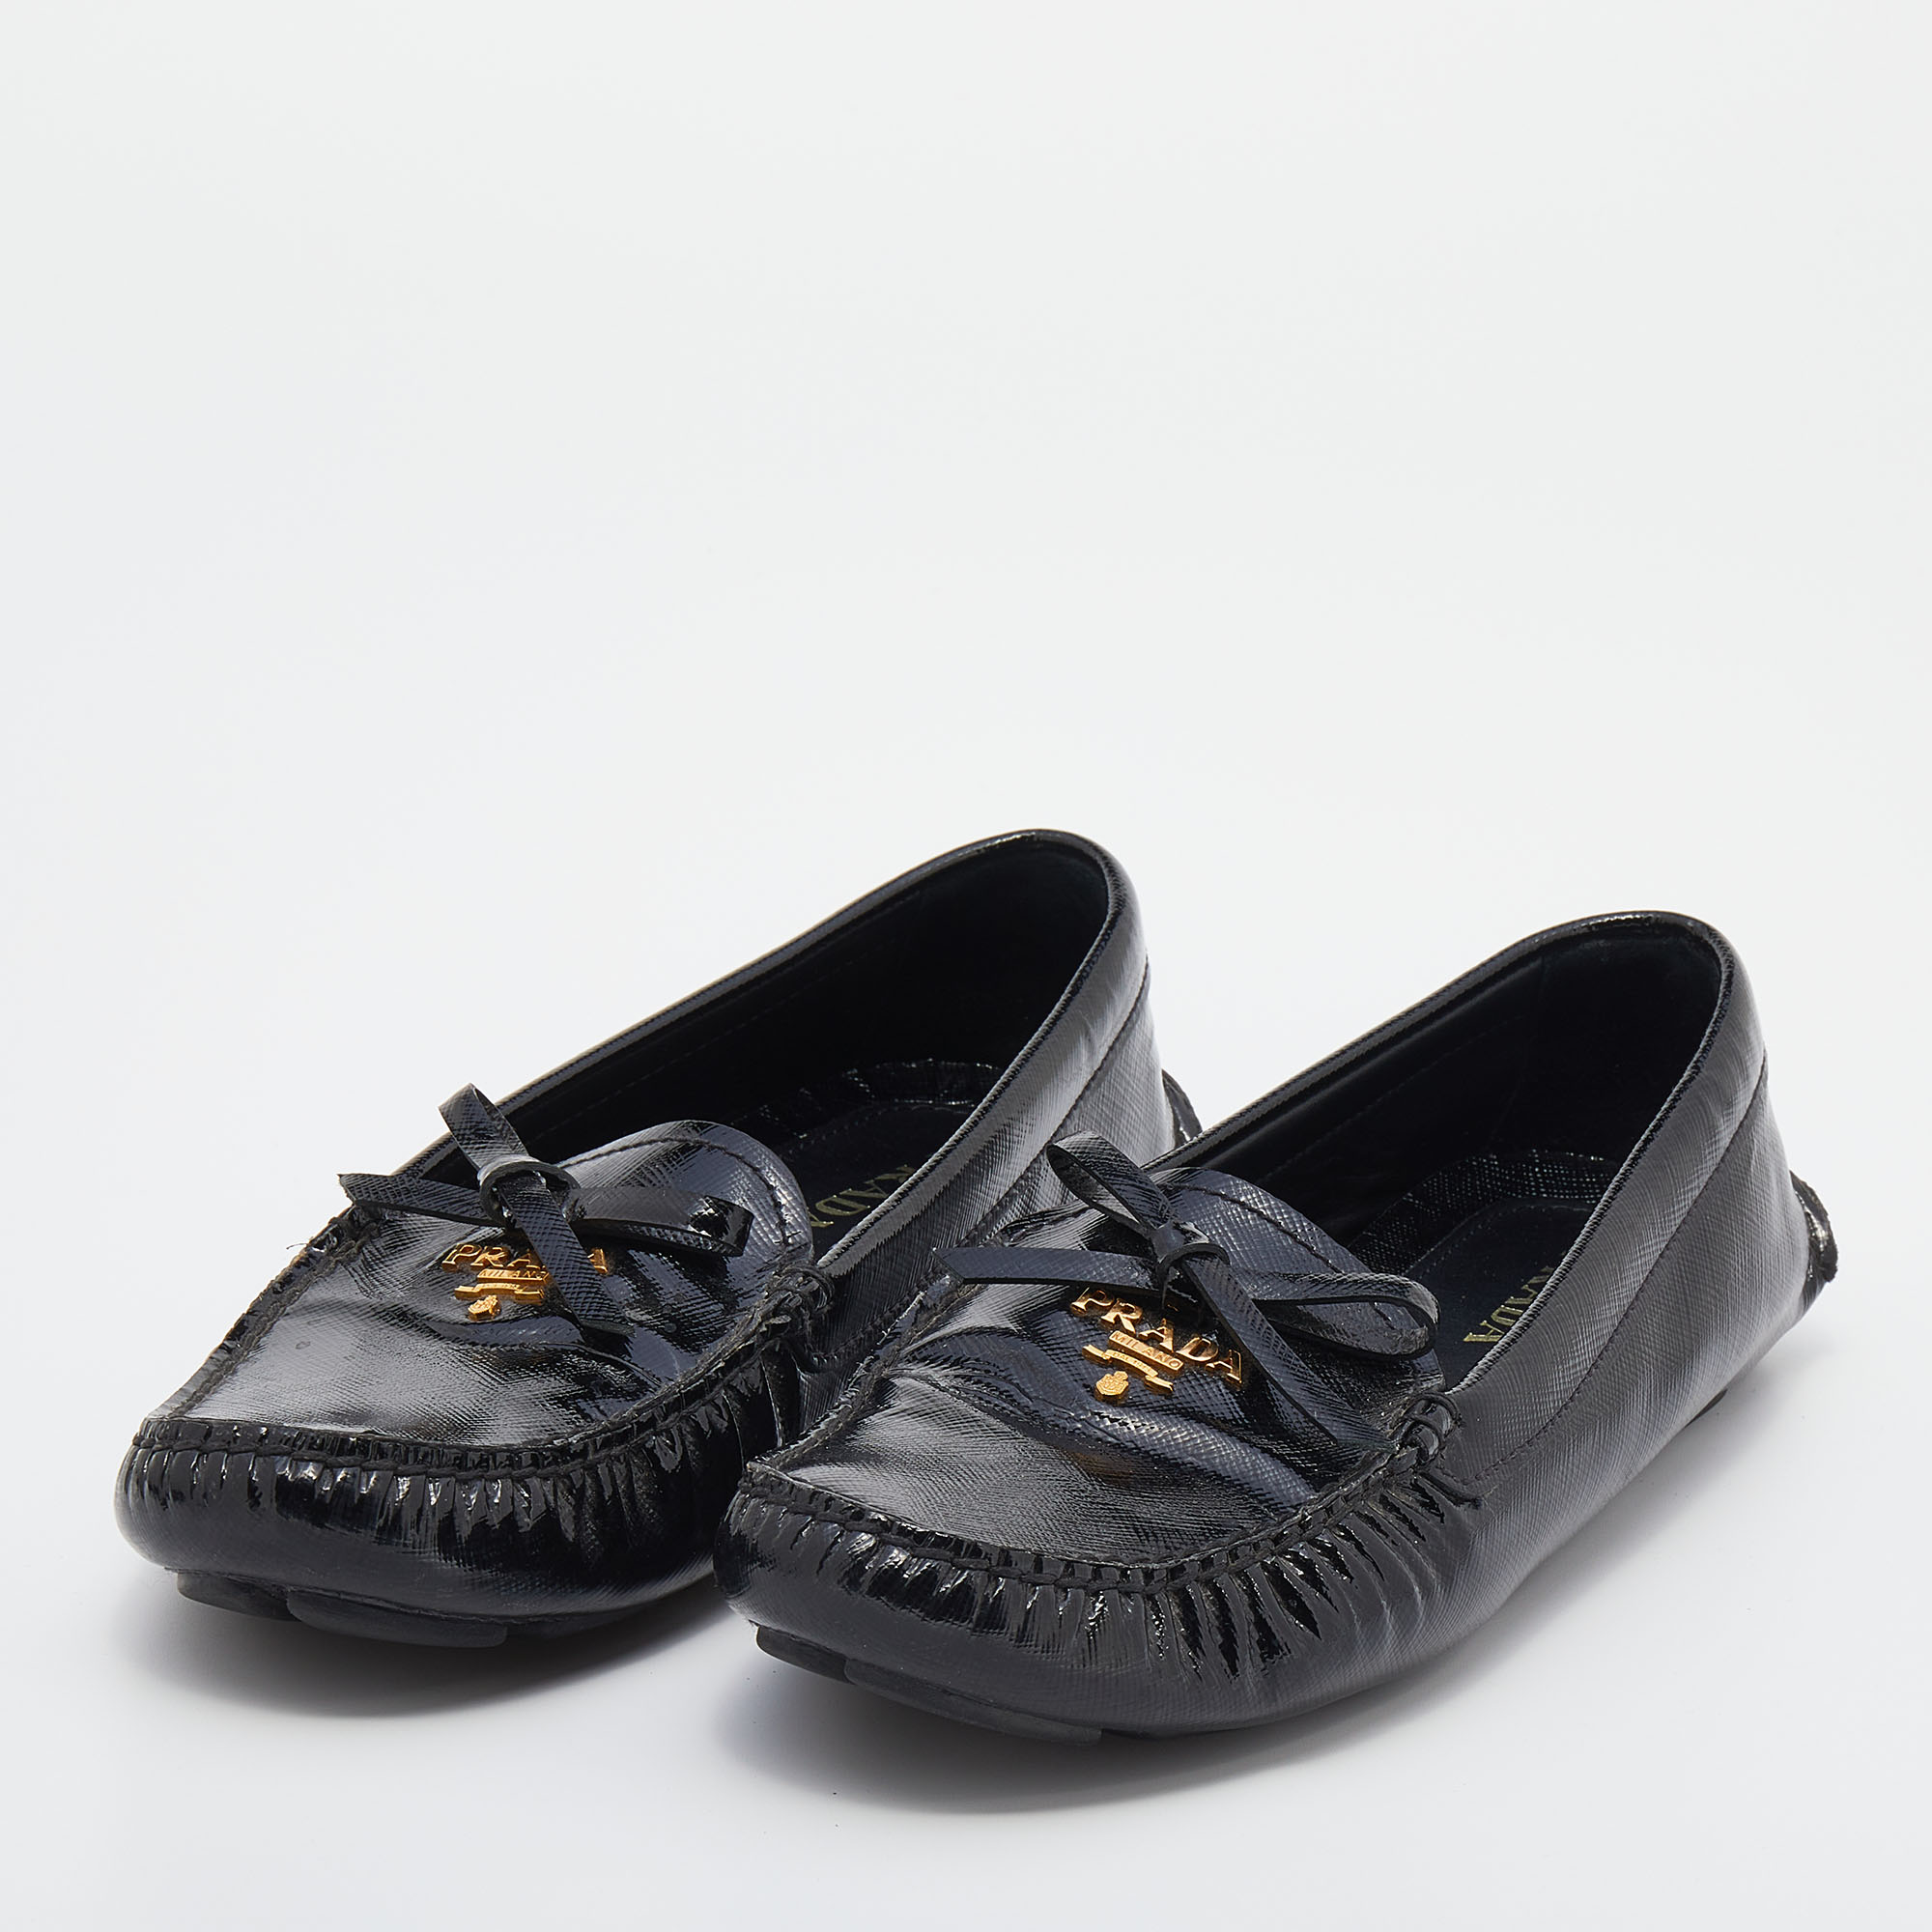 Prada Black Saffiano Lux Leather Bow Slip On Loafers Size